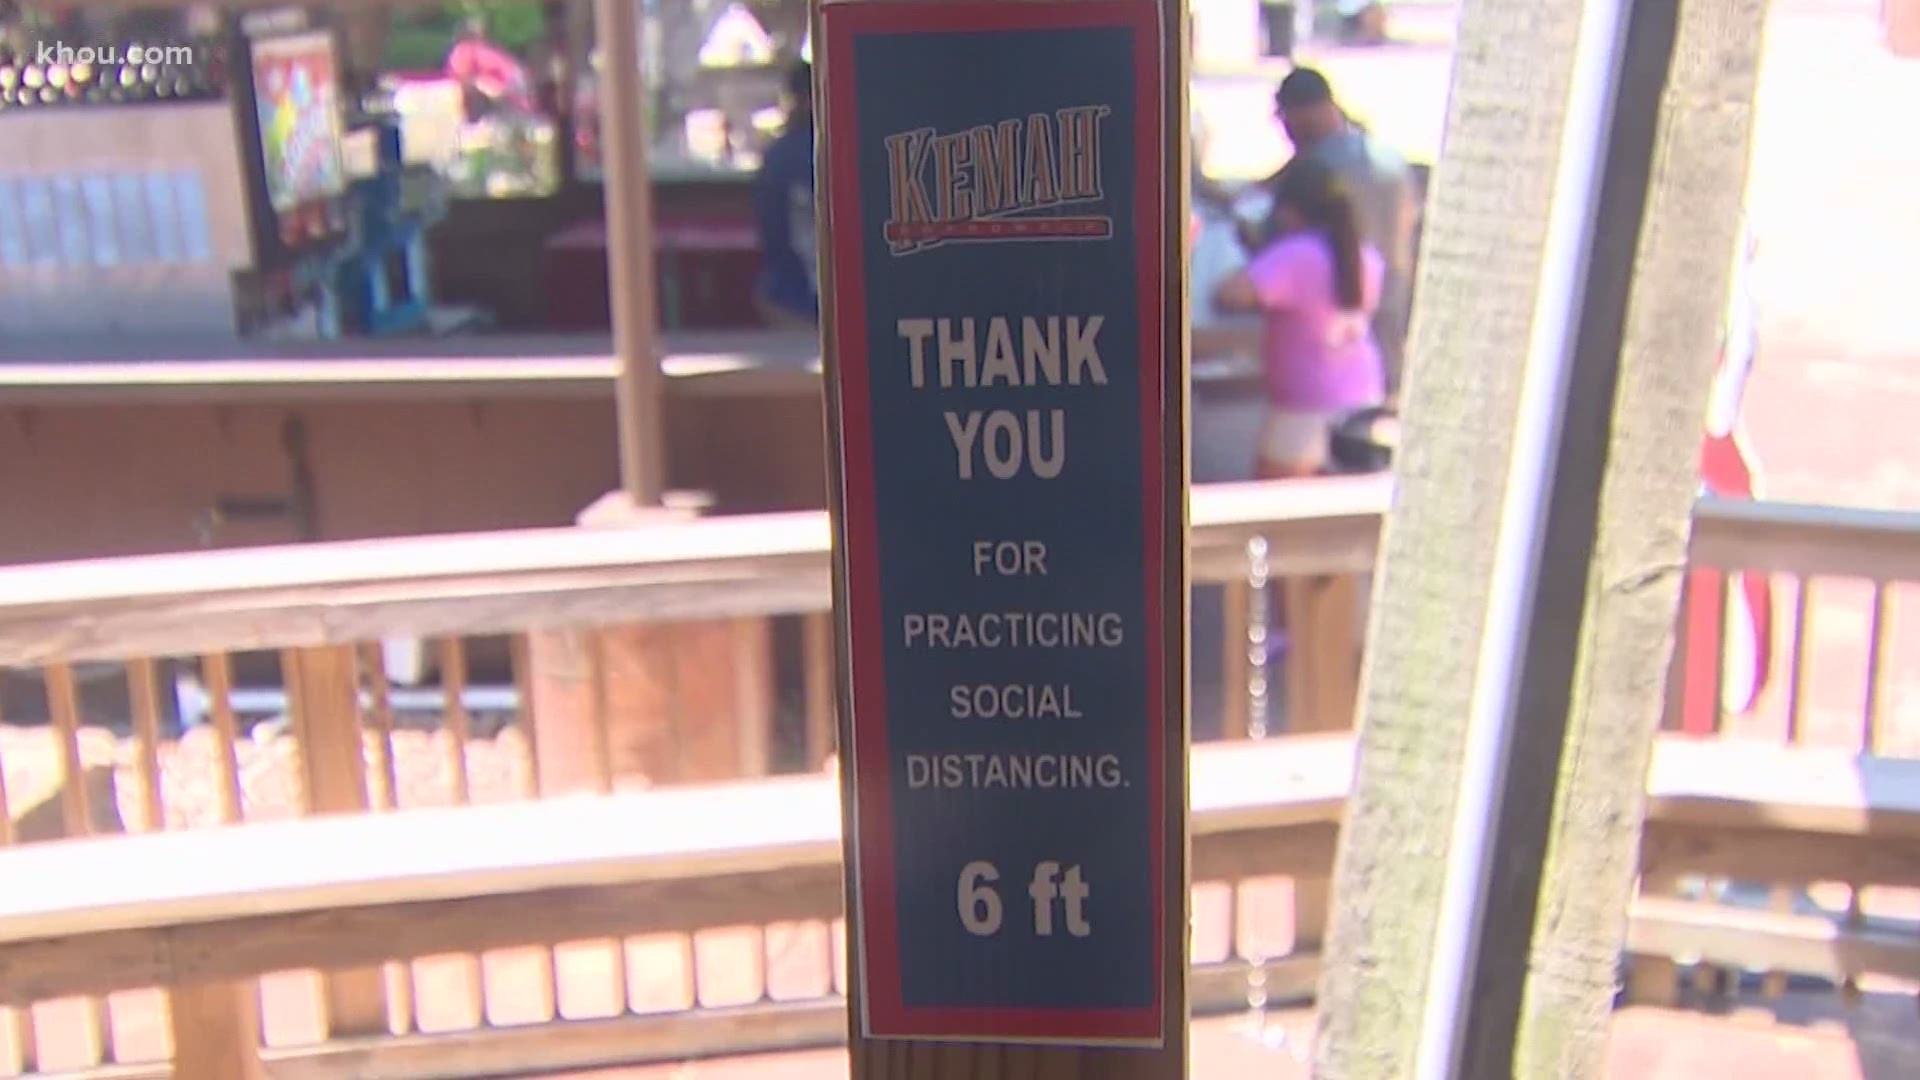 Kemah Boardwalk, Pleasure Pier, bars and restaurants are taking steps to keep guests safe. But still, you have to do your part.